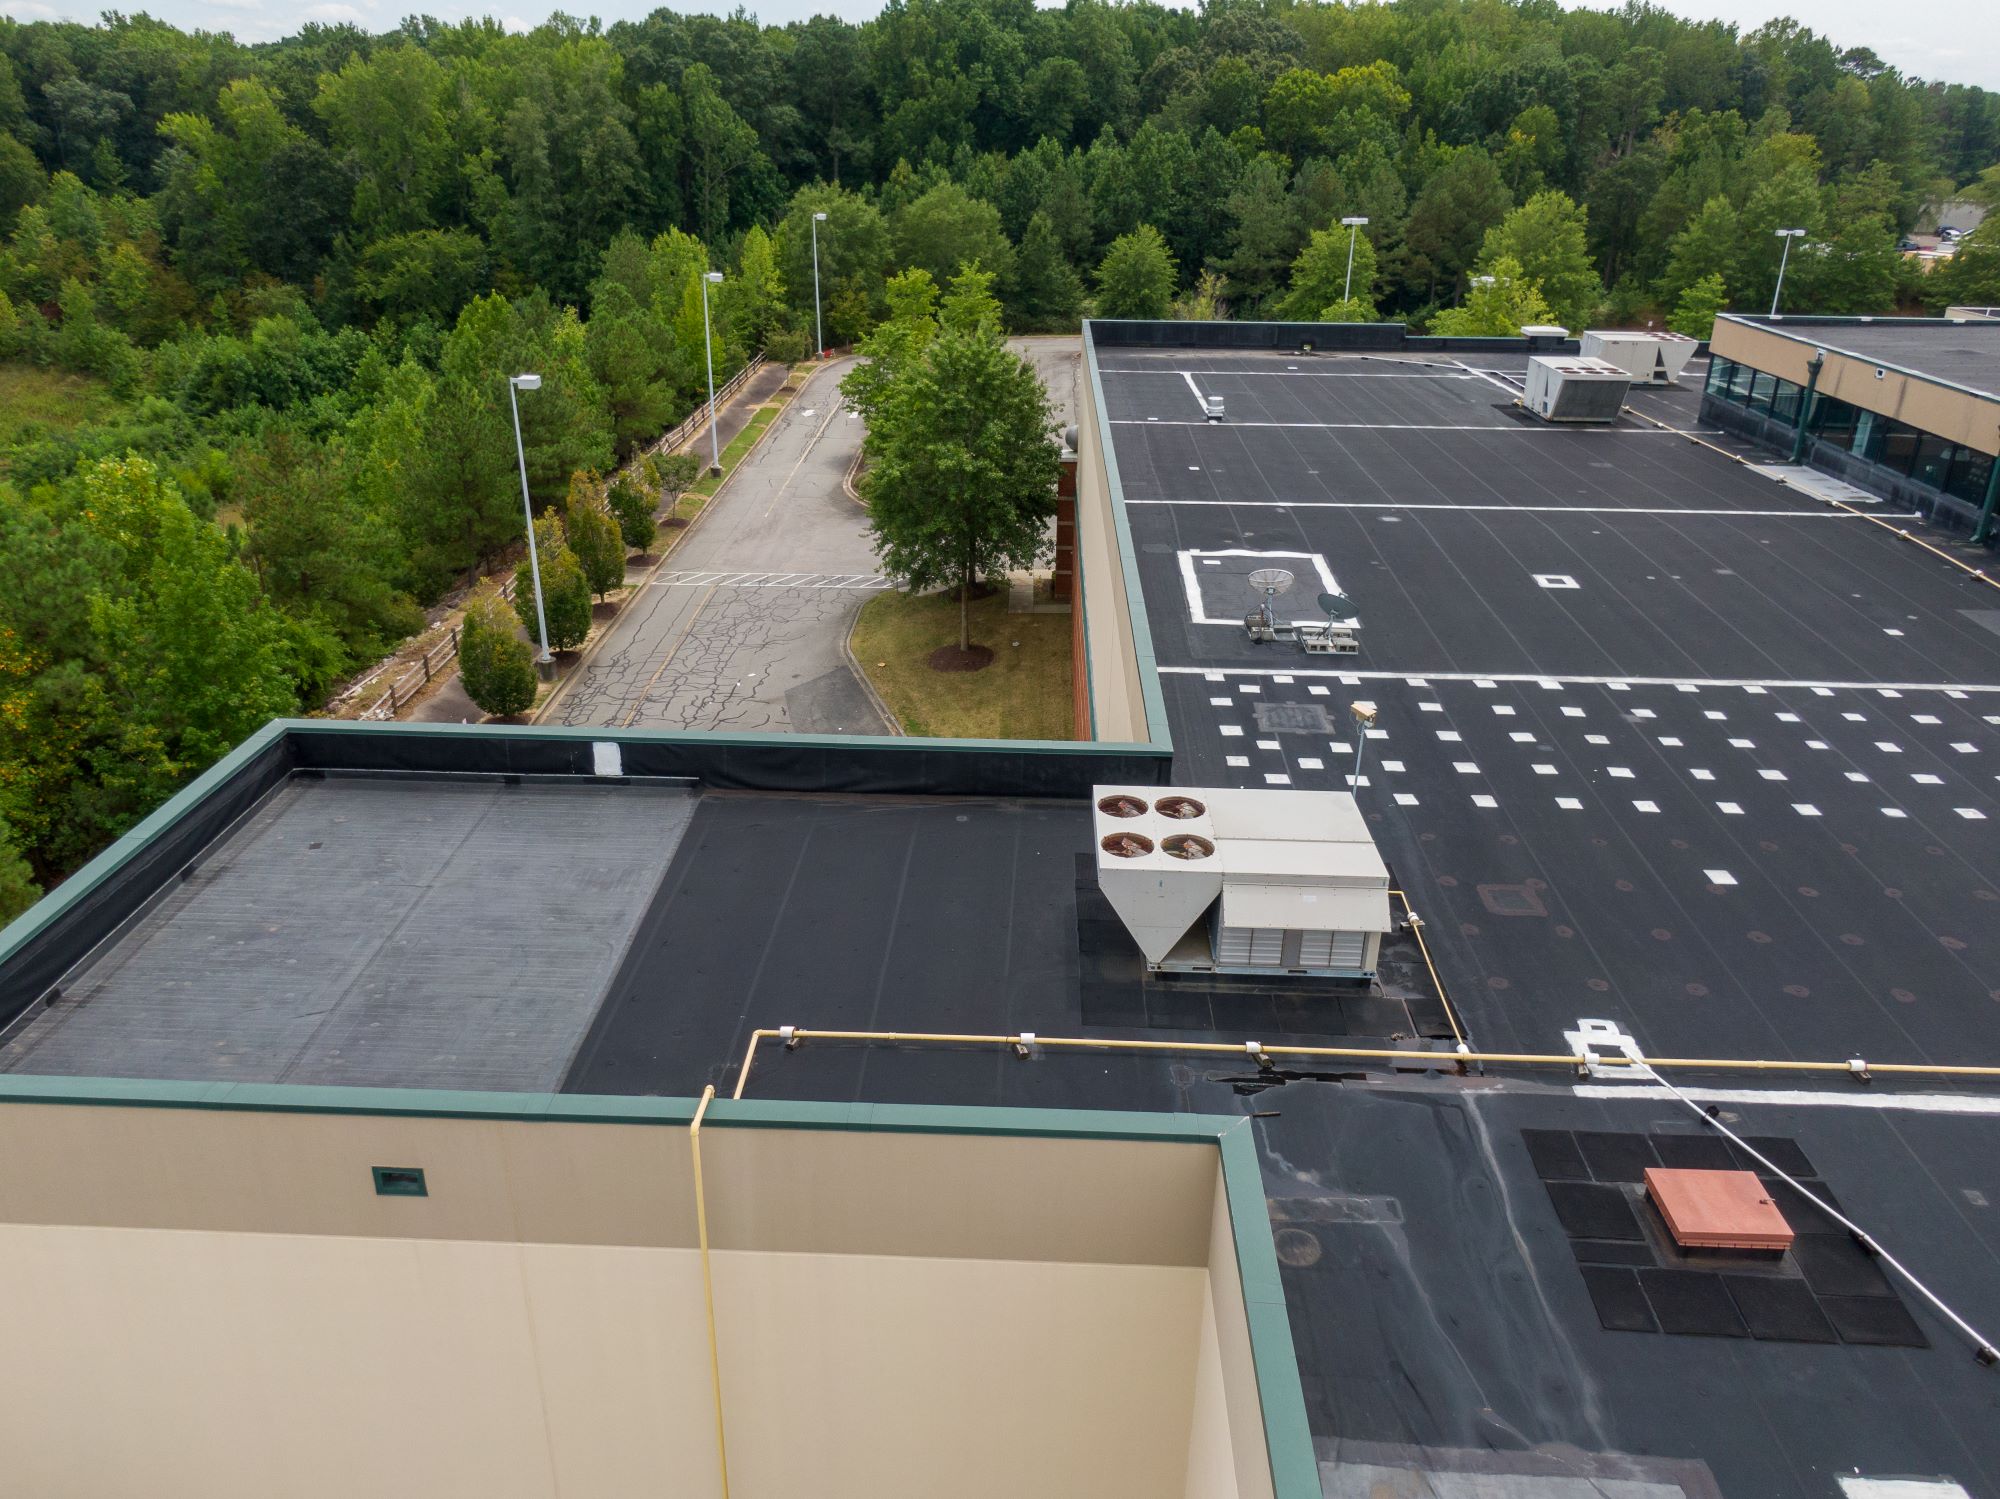 Commercial roofing solutions